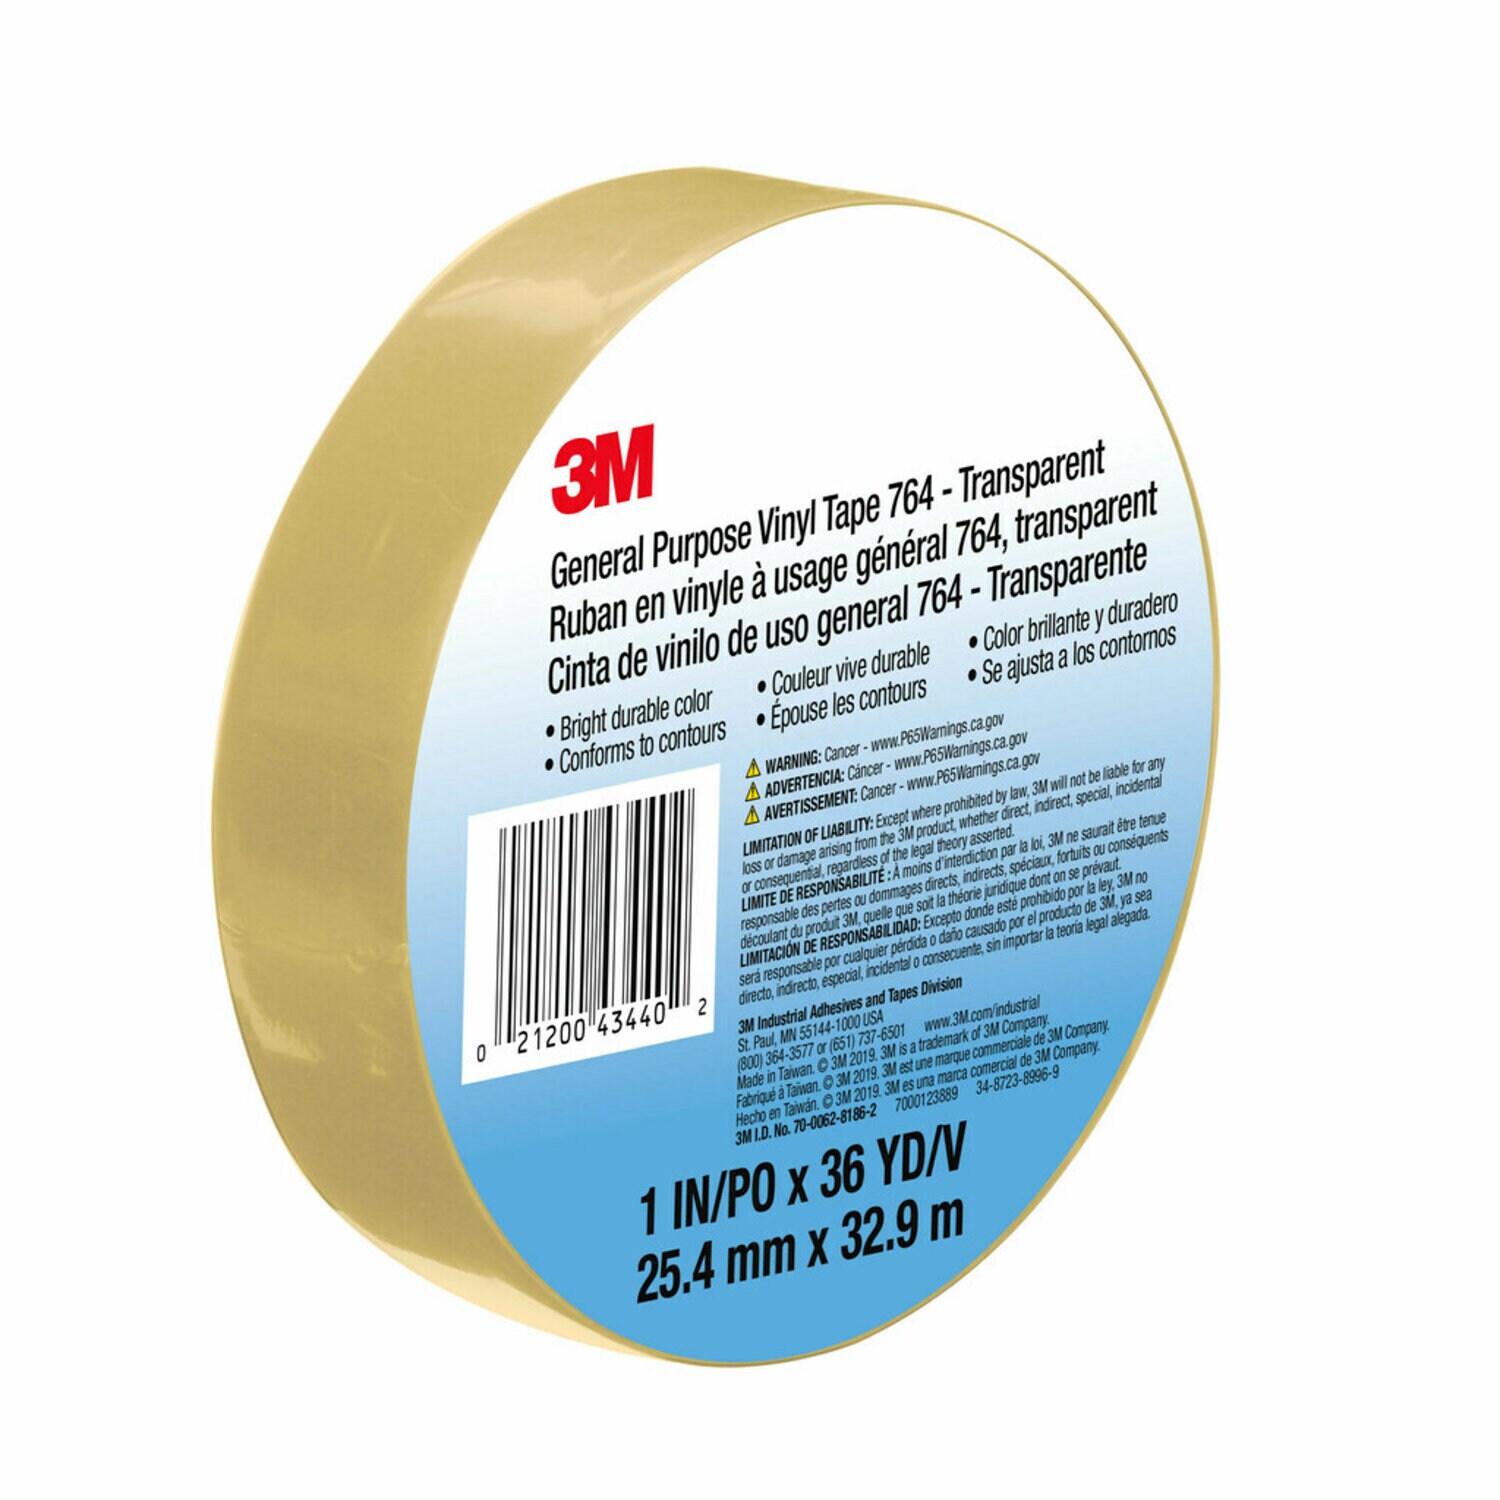 7000123889 - 3M General Purpose Vinyl Tape 764, Transparent, 1 in x 36 yd, 5 mil, 36 Roll/Case, Individually Wrapped Conveniently Packaged